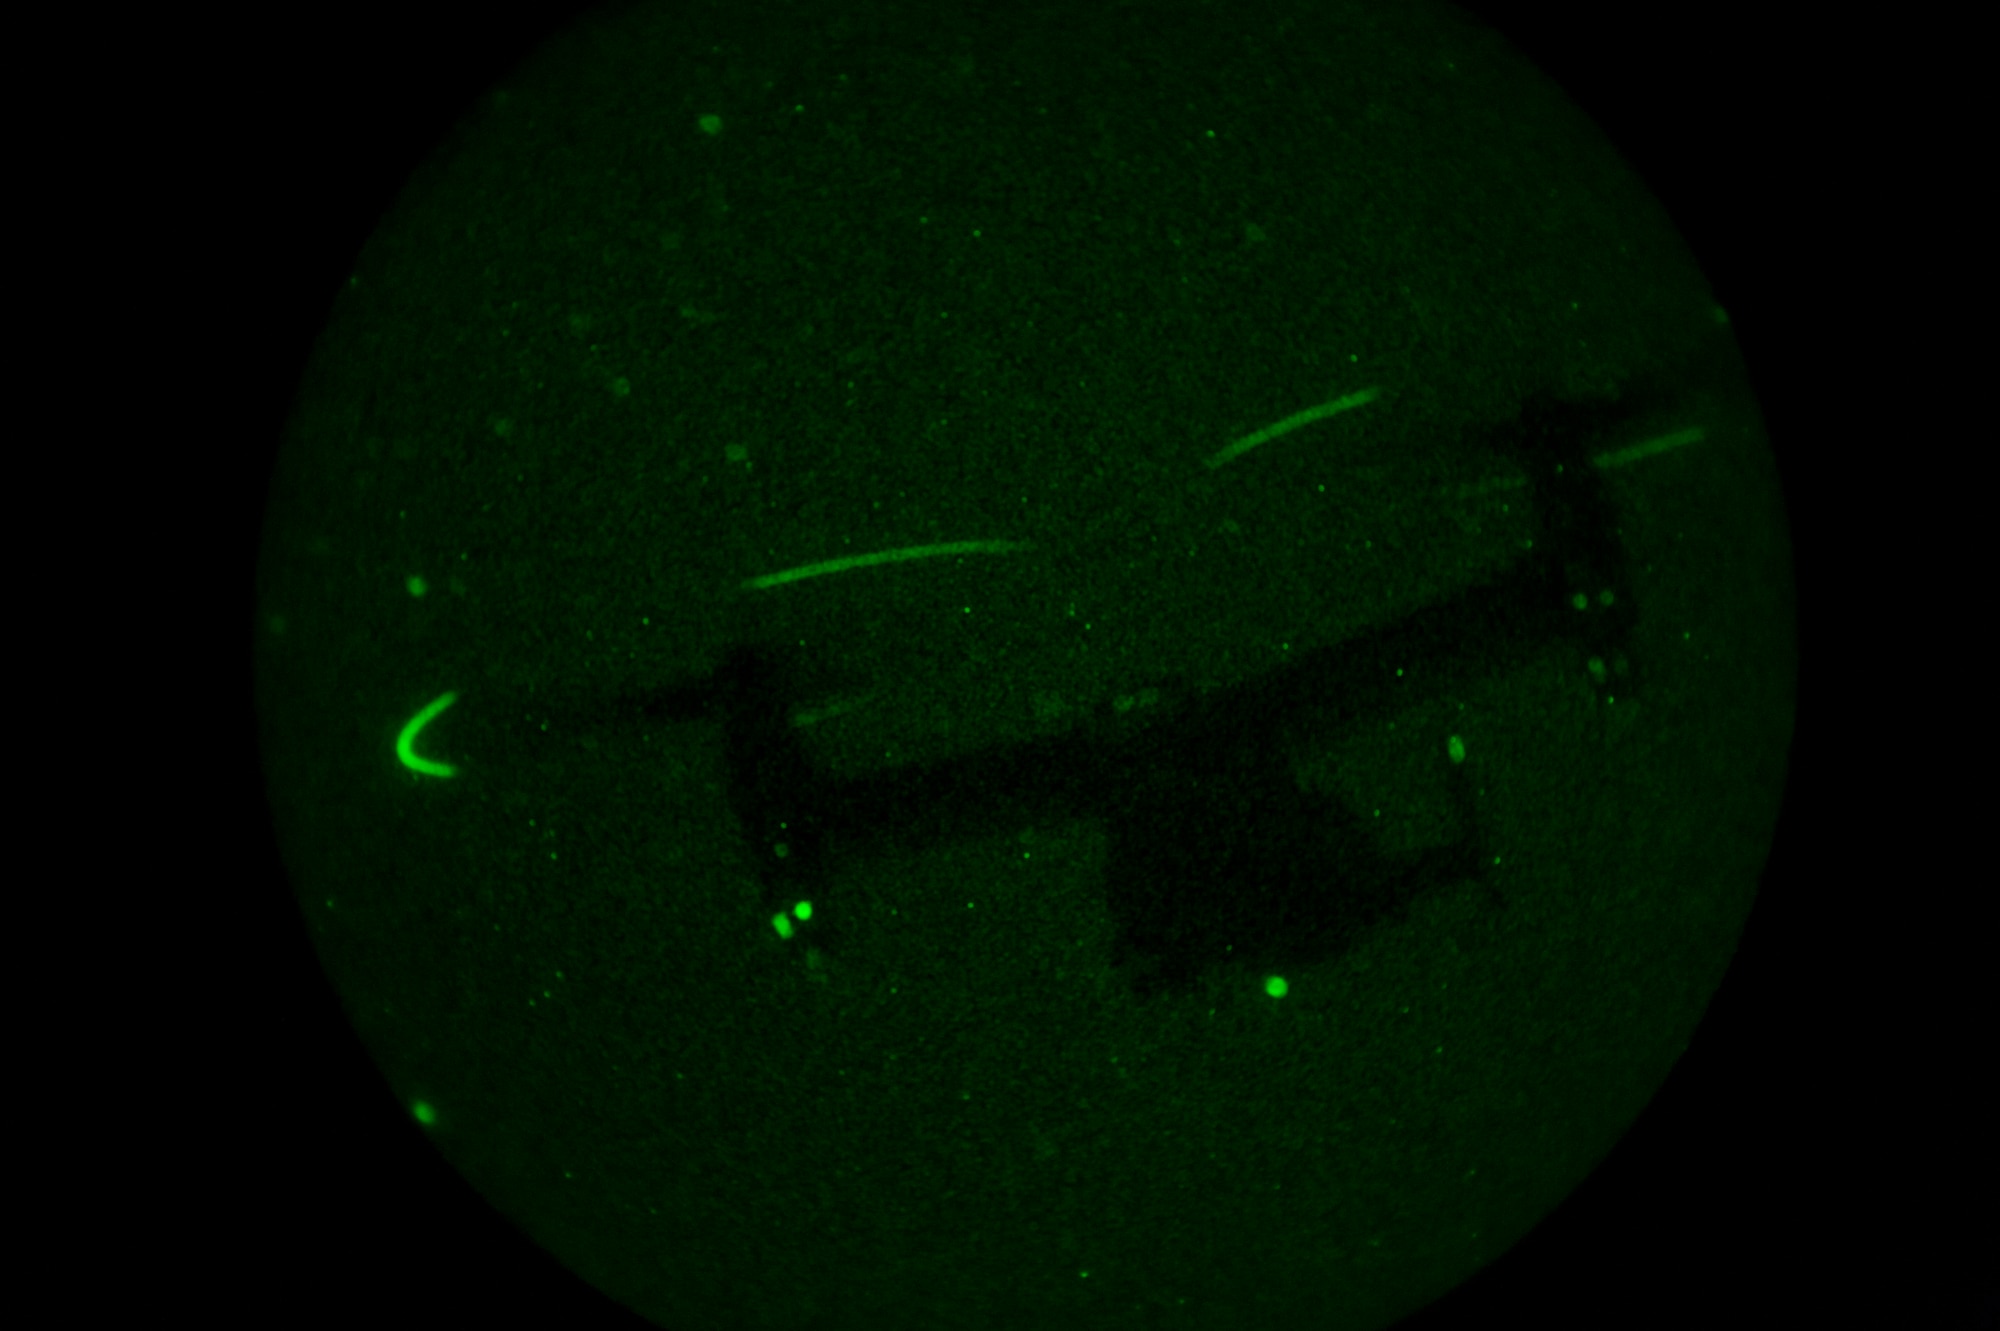 A CV-22 Osprey conducts nighttime search and recovery during a training exercise in Green River, Utah, July 27, 2016. The full mission profile provided these Airmen an opportunity to practice their core competencies and hone their skills in unfamiliar terrain similar to what they might encounter overseas. (U.S. Air Force photo/Staff Sgt. Eboni Reams)